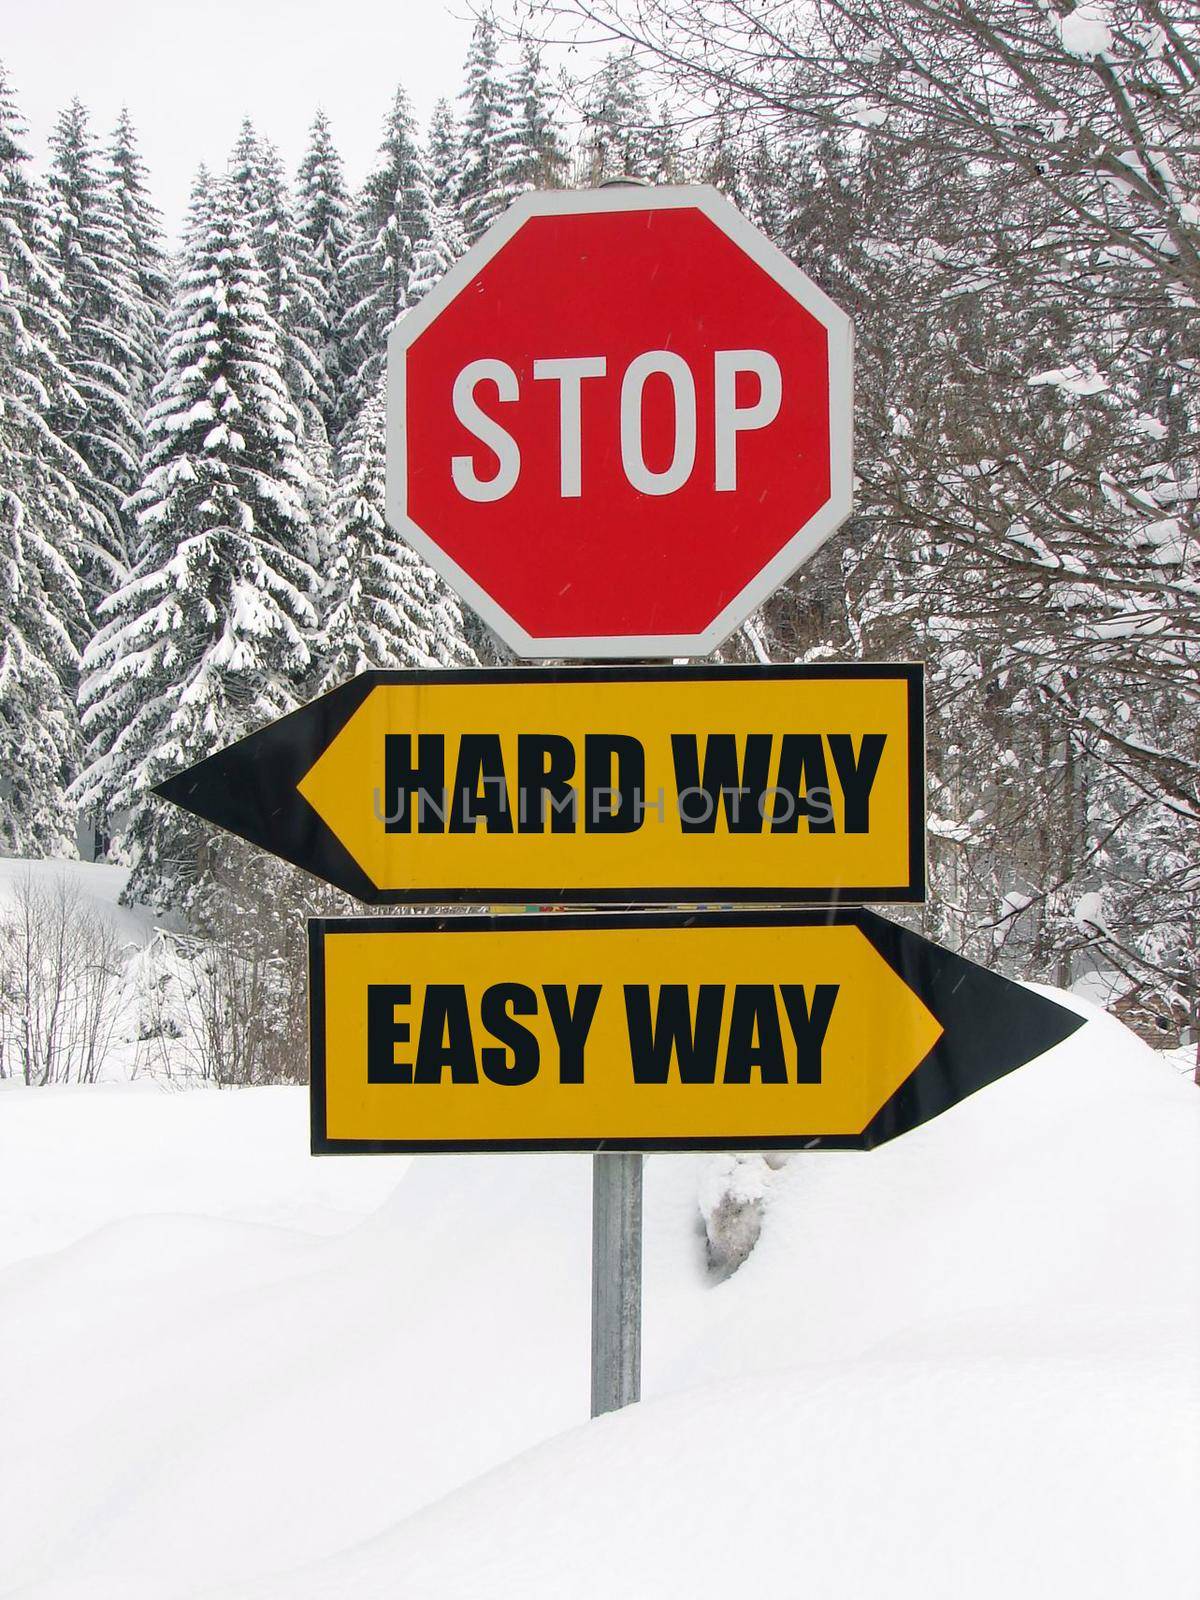 hard and easy way road sign in nature by dotshock